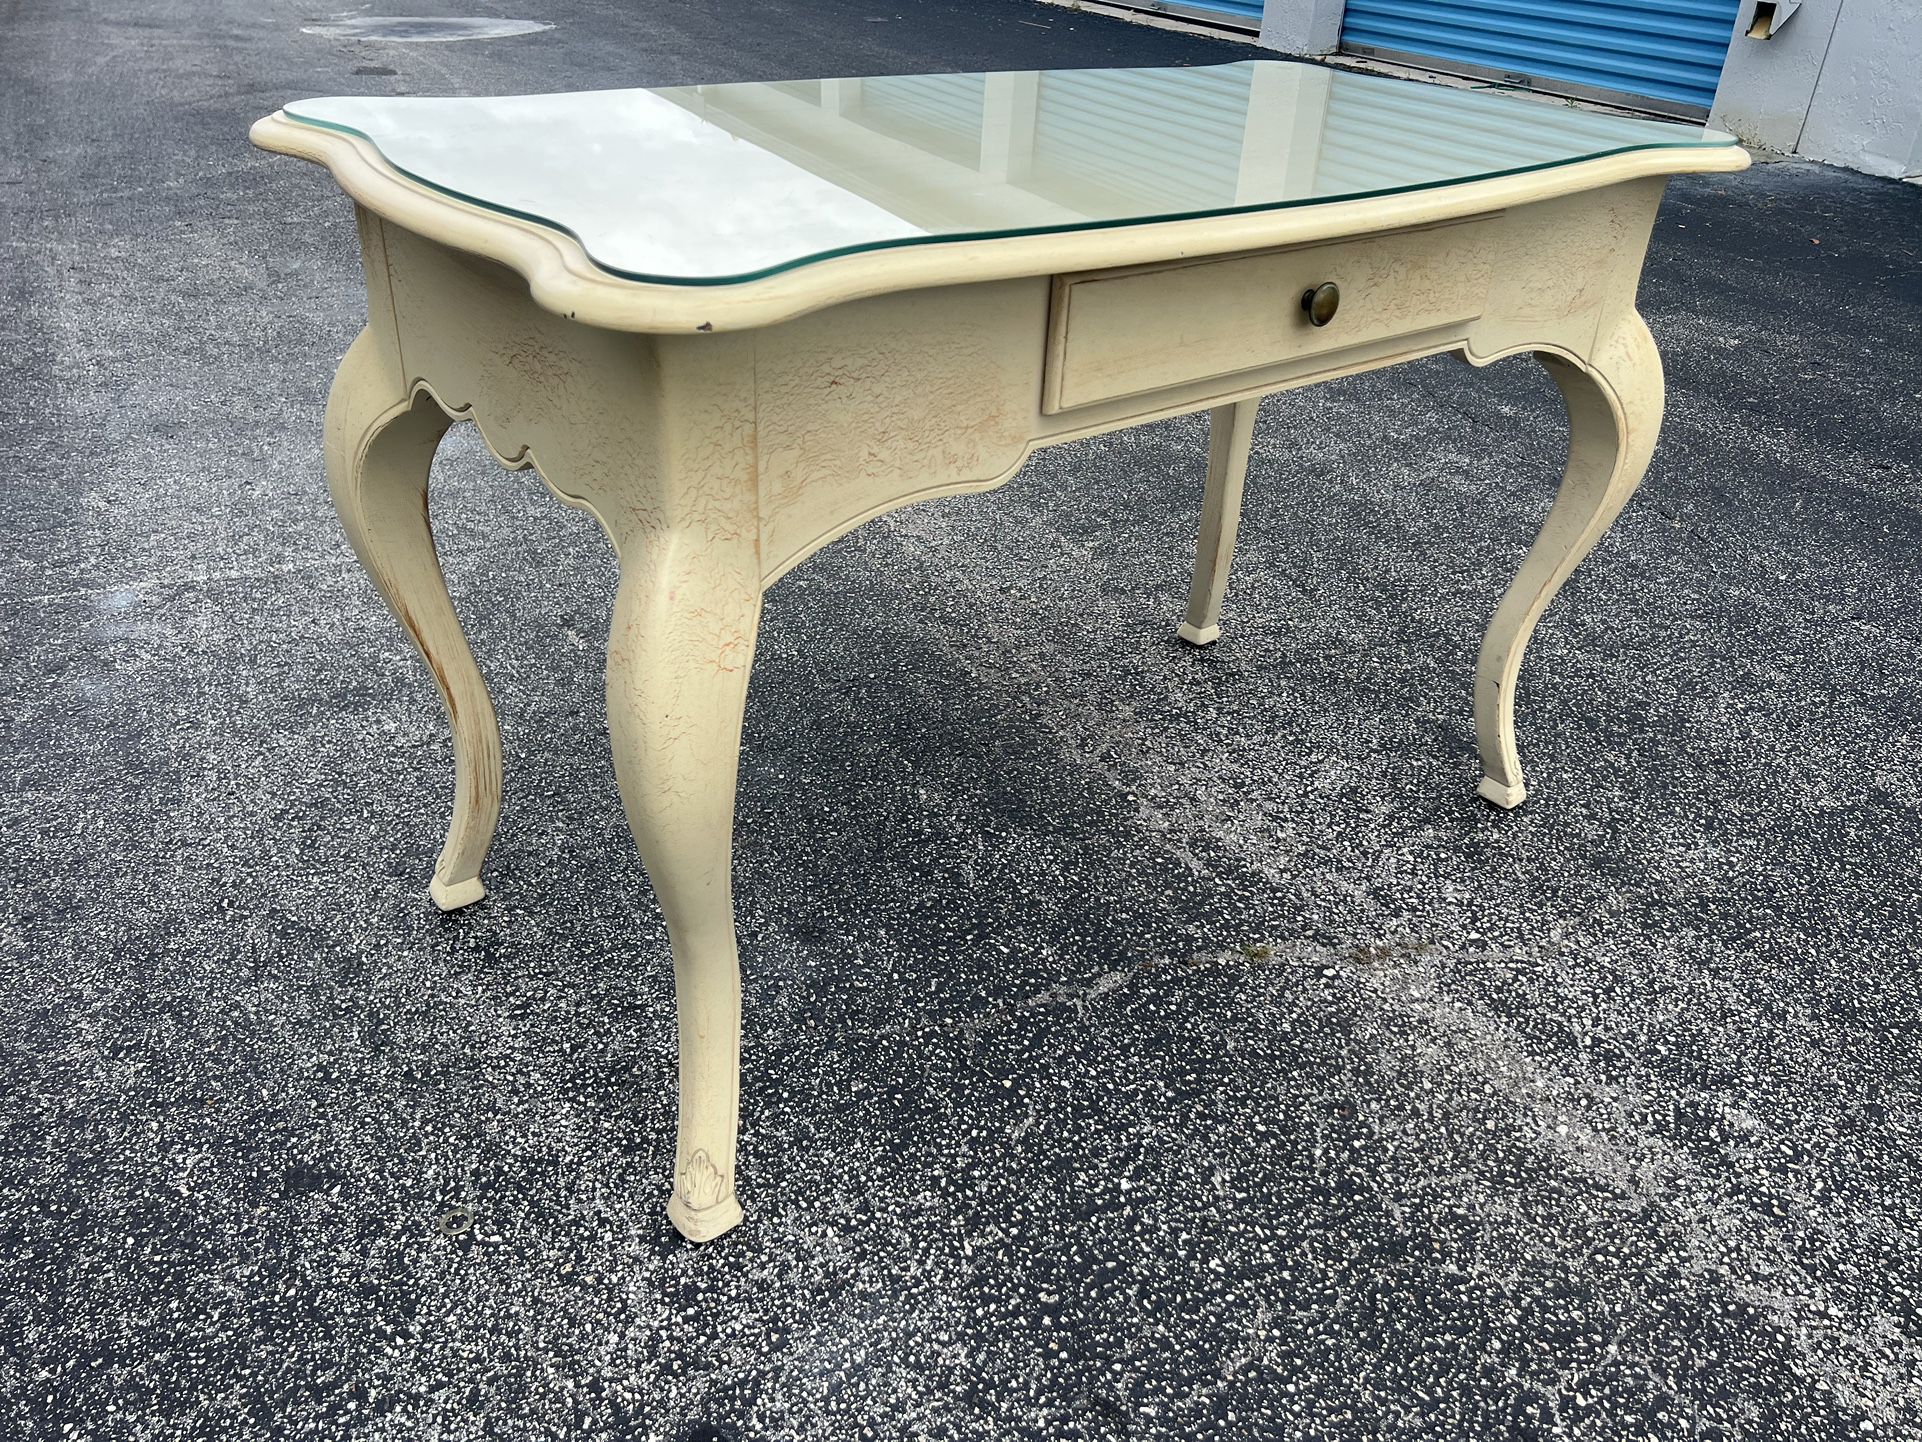 Off White Cream Colored Antiqued Glass Top Vanity Desk Entry Table! Good condition! Delivery Available!  48x25x29in